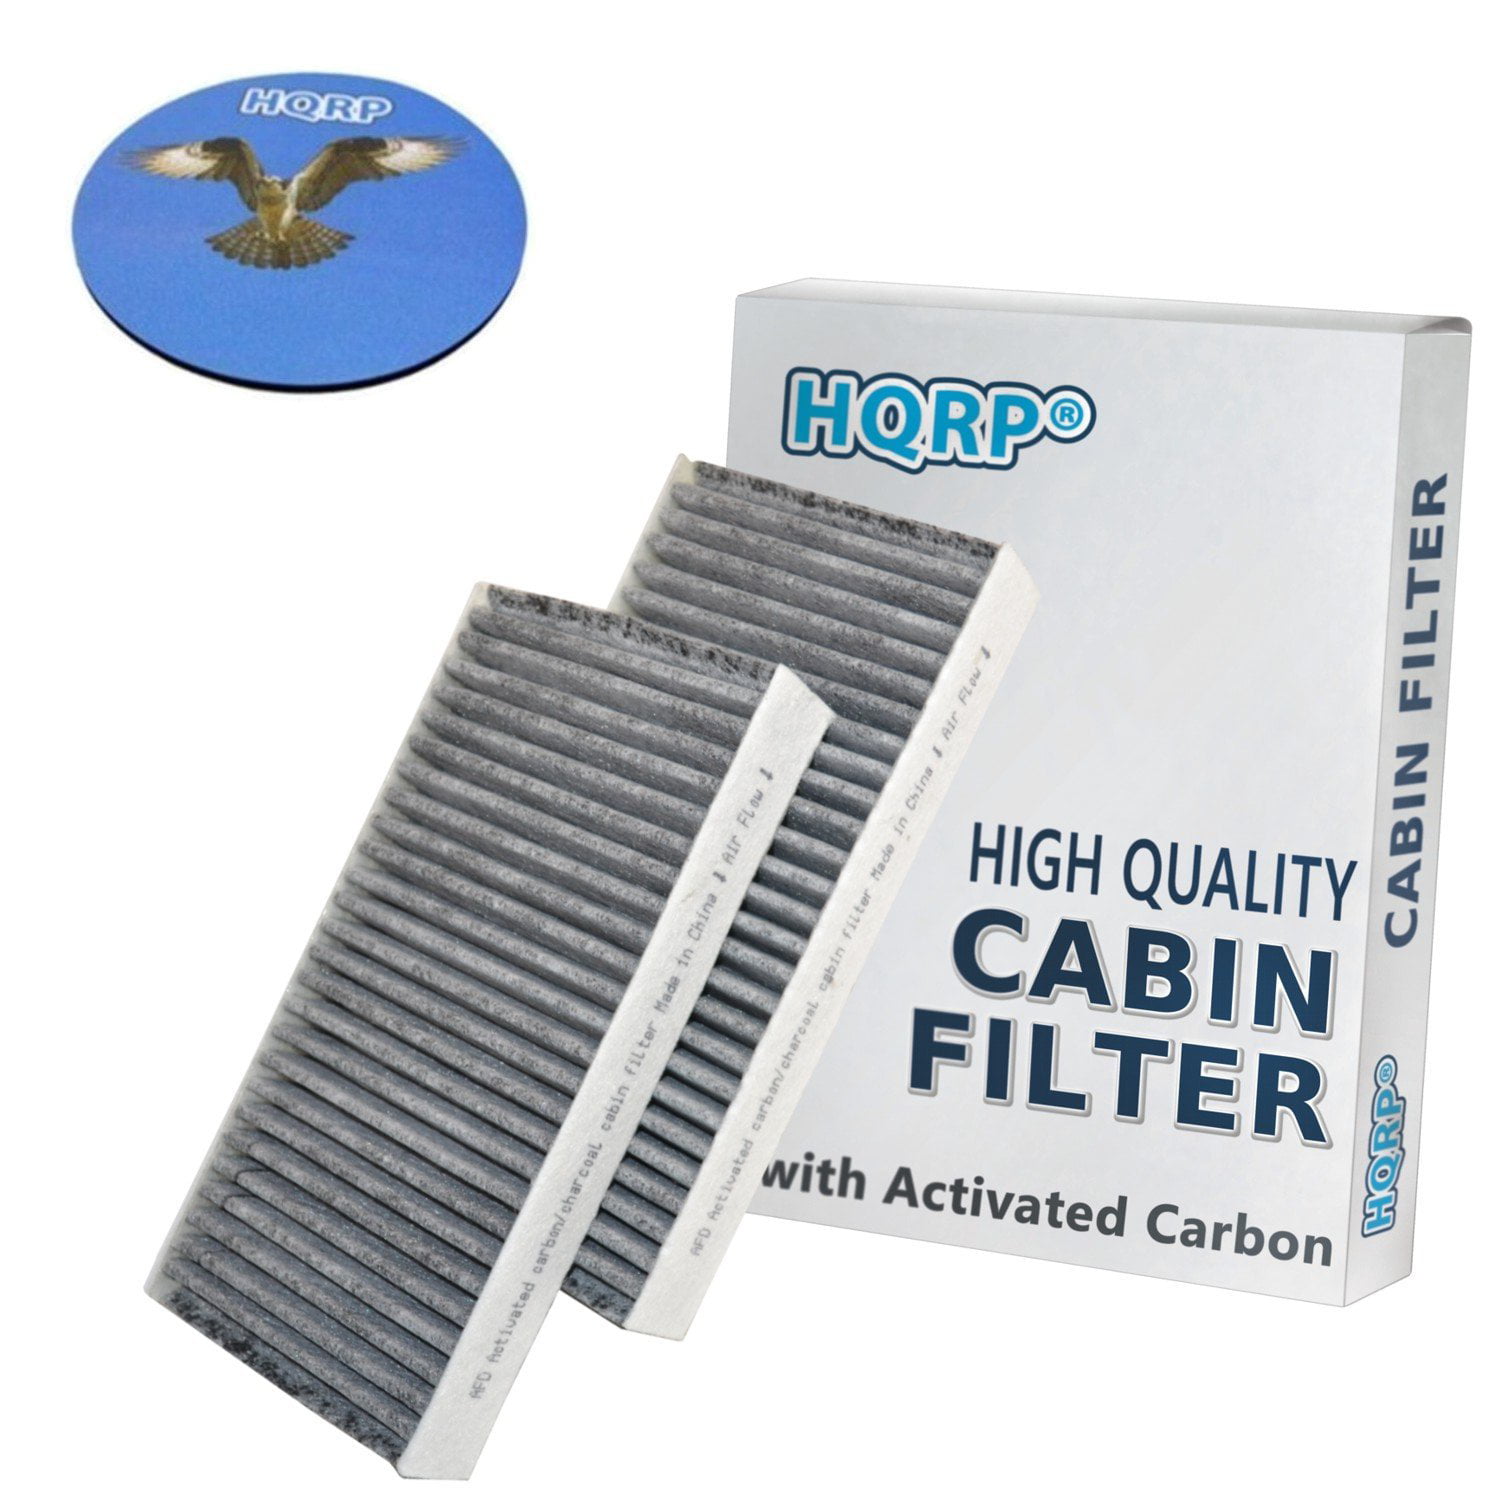 Cabin Air Filter 80292-S5D-A01 for Honda Civic CRV 02-05 Acura RSX 02-06 Element